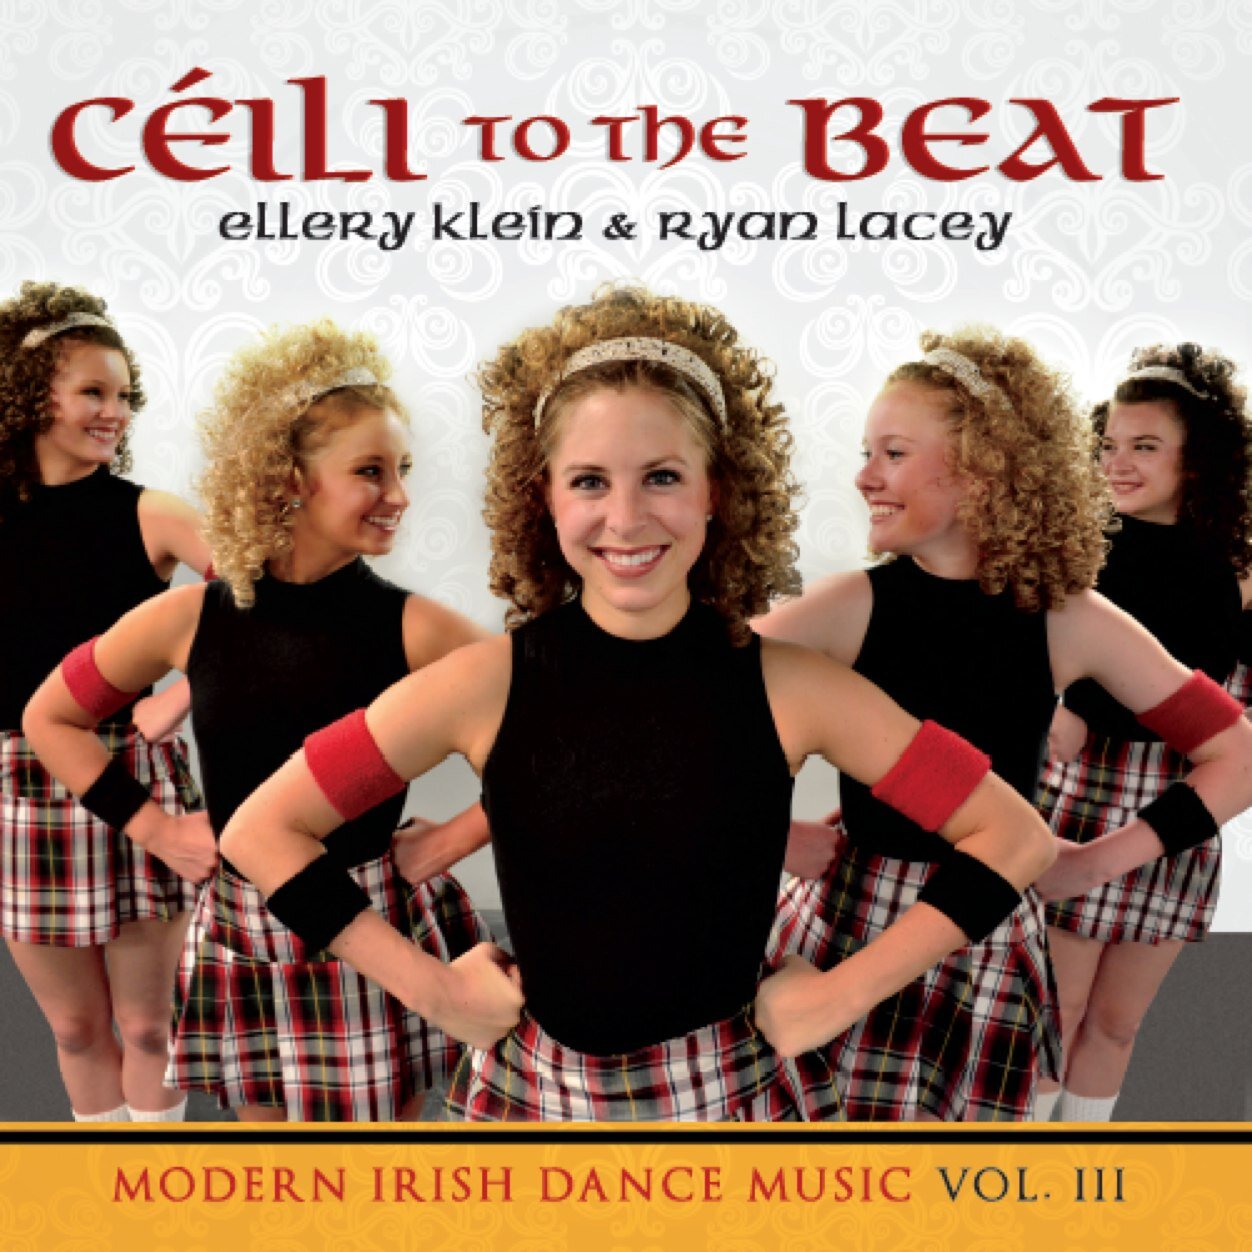 Hip and fun music for competitive Irish dance from Ellery Klein and Ryan Lacey. CDs Step Into the Beat, Kick Into the Beat, and 2014's Ceili to the Beat!